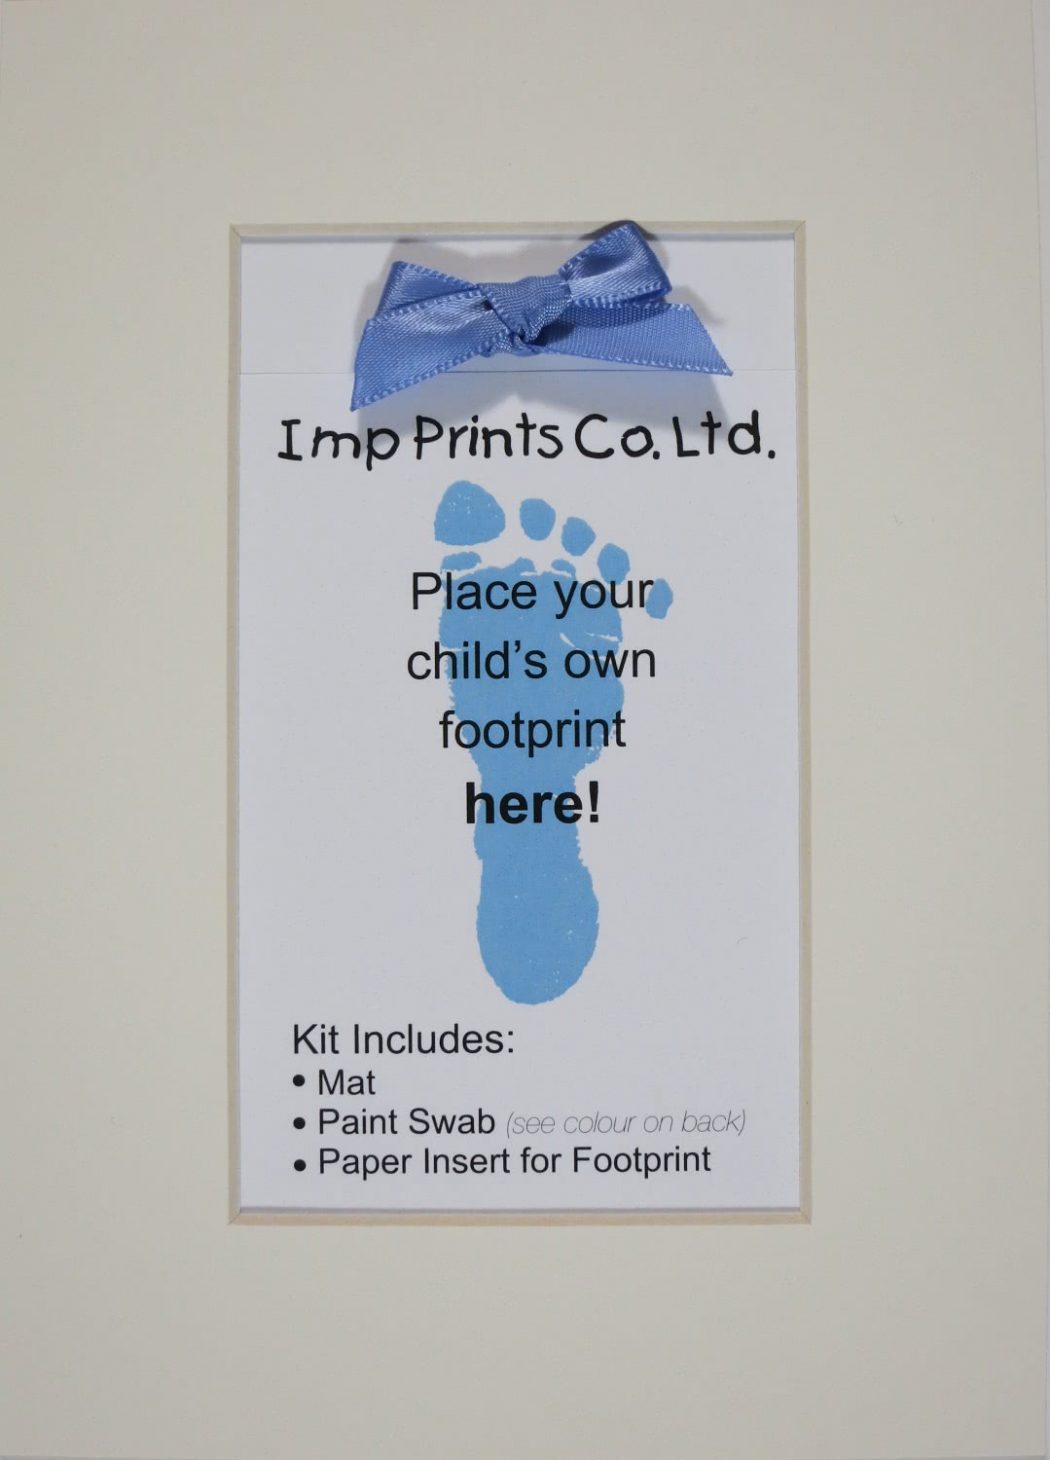 Imp Prints Co keepsakes for parents Plain Ivory Mat with a blue bow on the paper near the top. An insert with an image of a blue footprint says "Place your child's own footprint here, kit includes Mat, Paint Swab, Paper